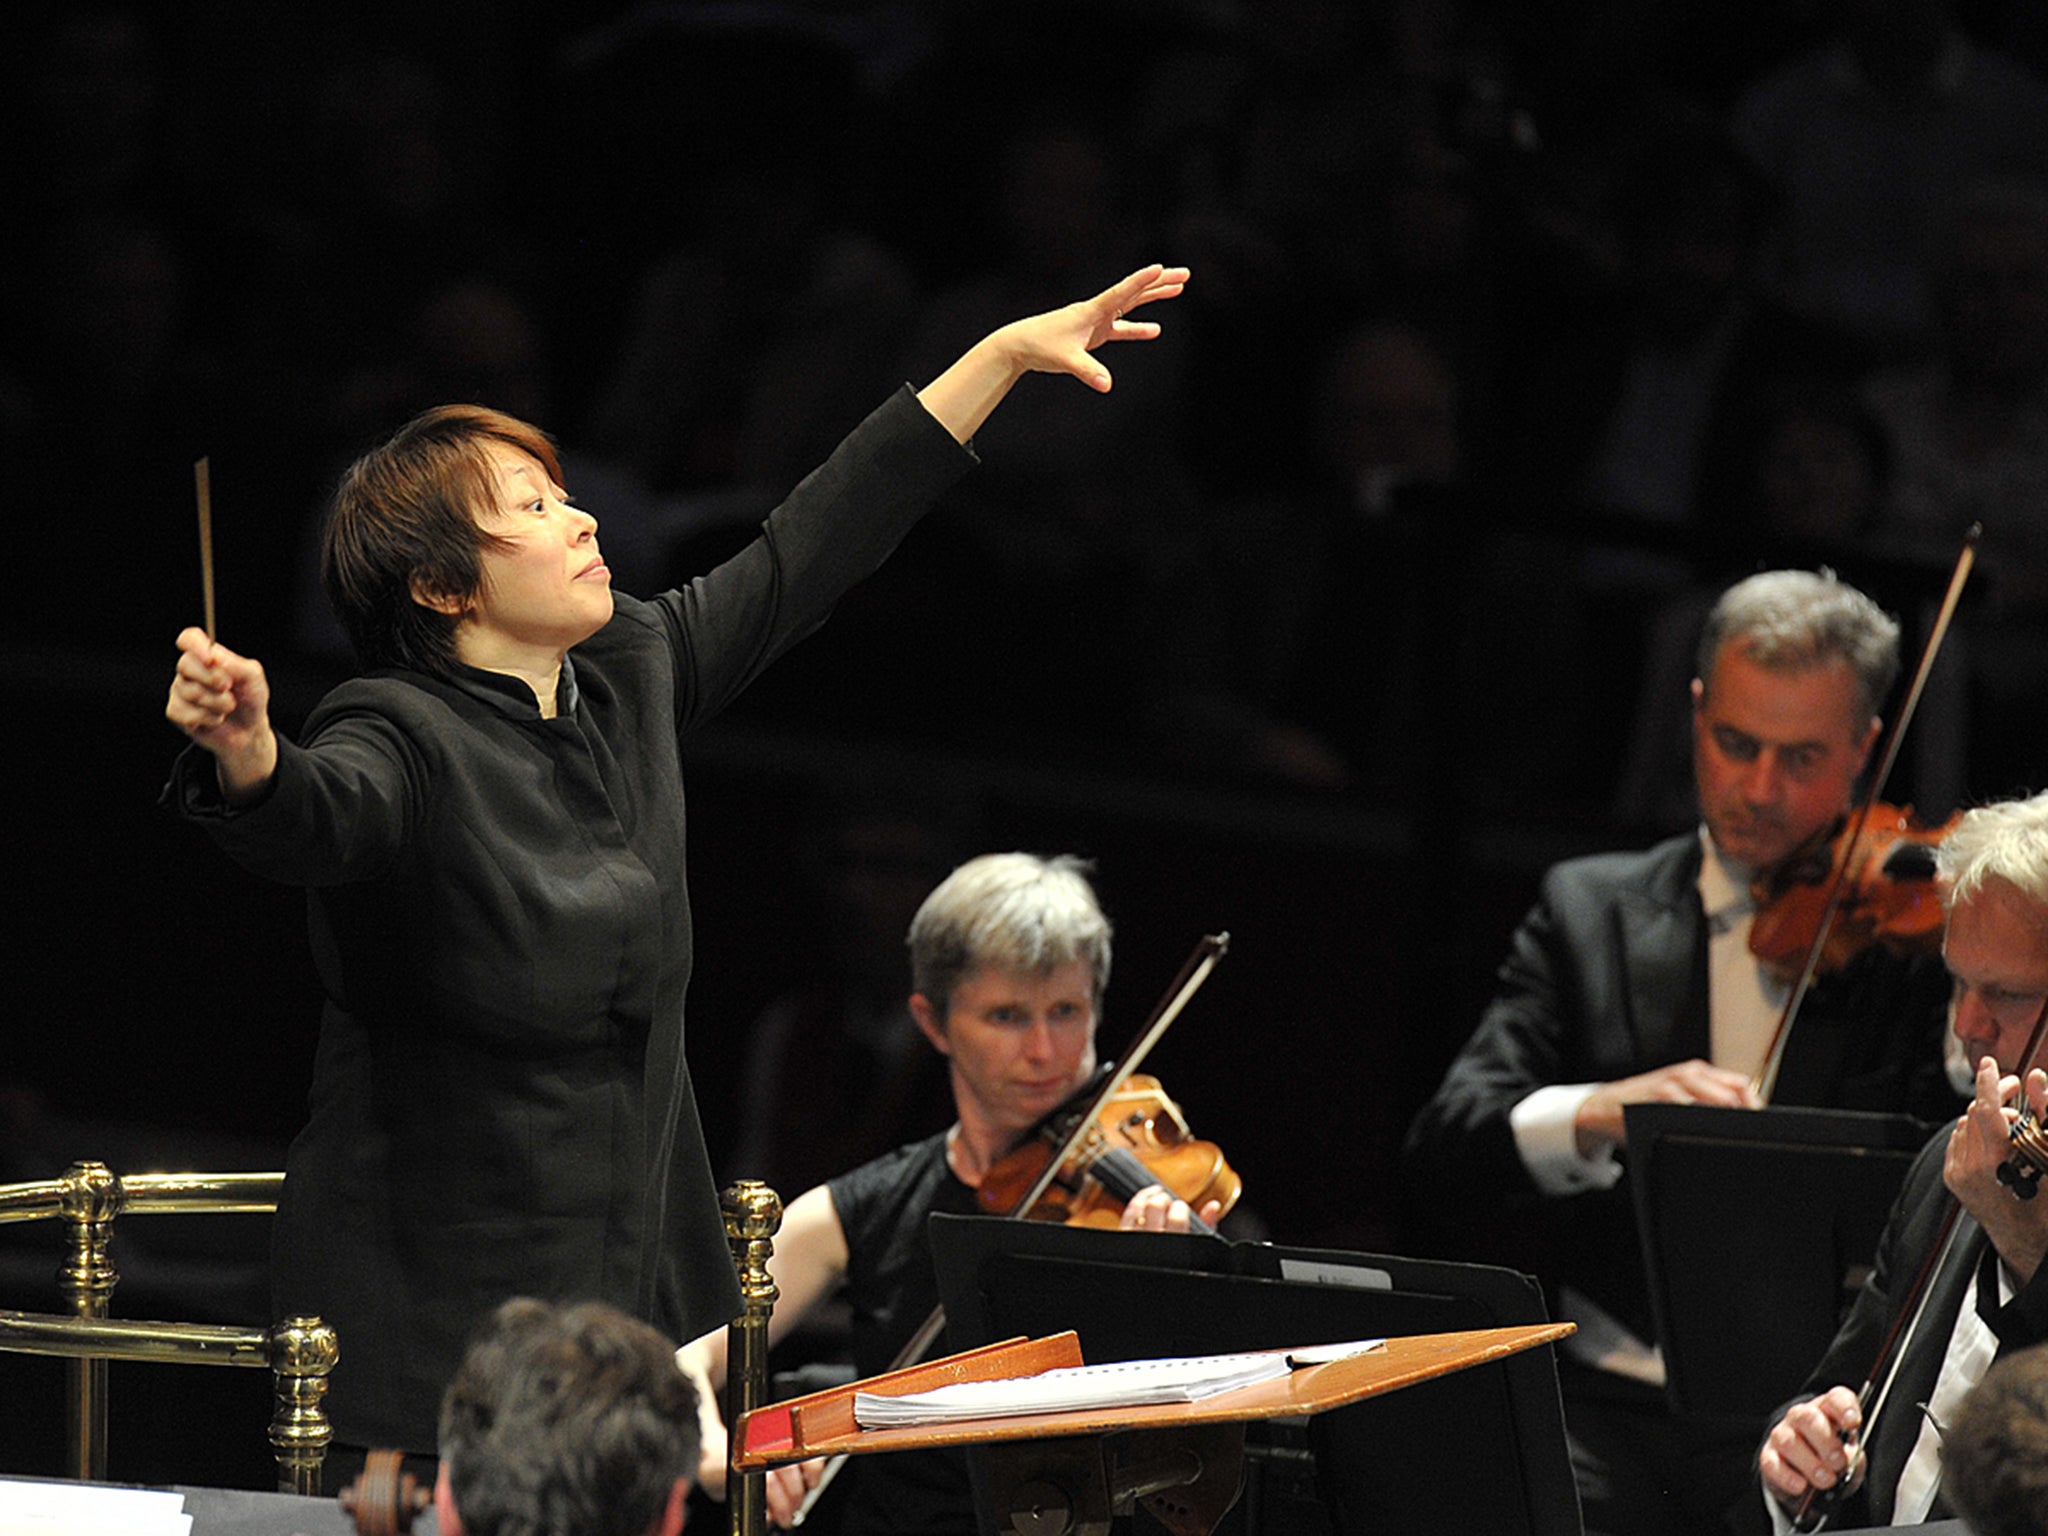 Xian Zhang conducts BBC National Orchestra of Wales at the BBC Proms 2015 at the Royal Albert Hall on Wednesday 29 July